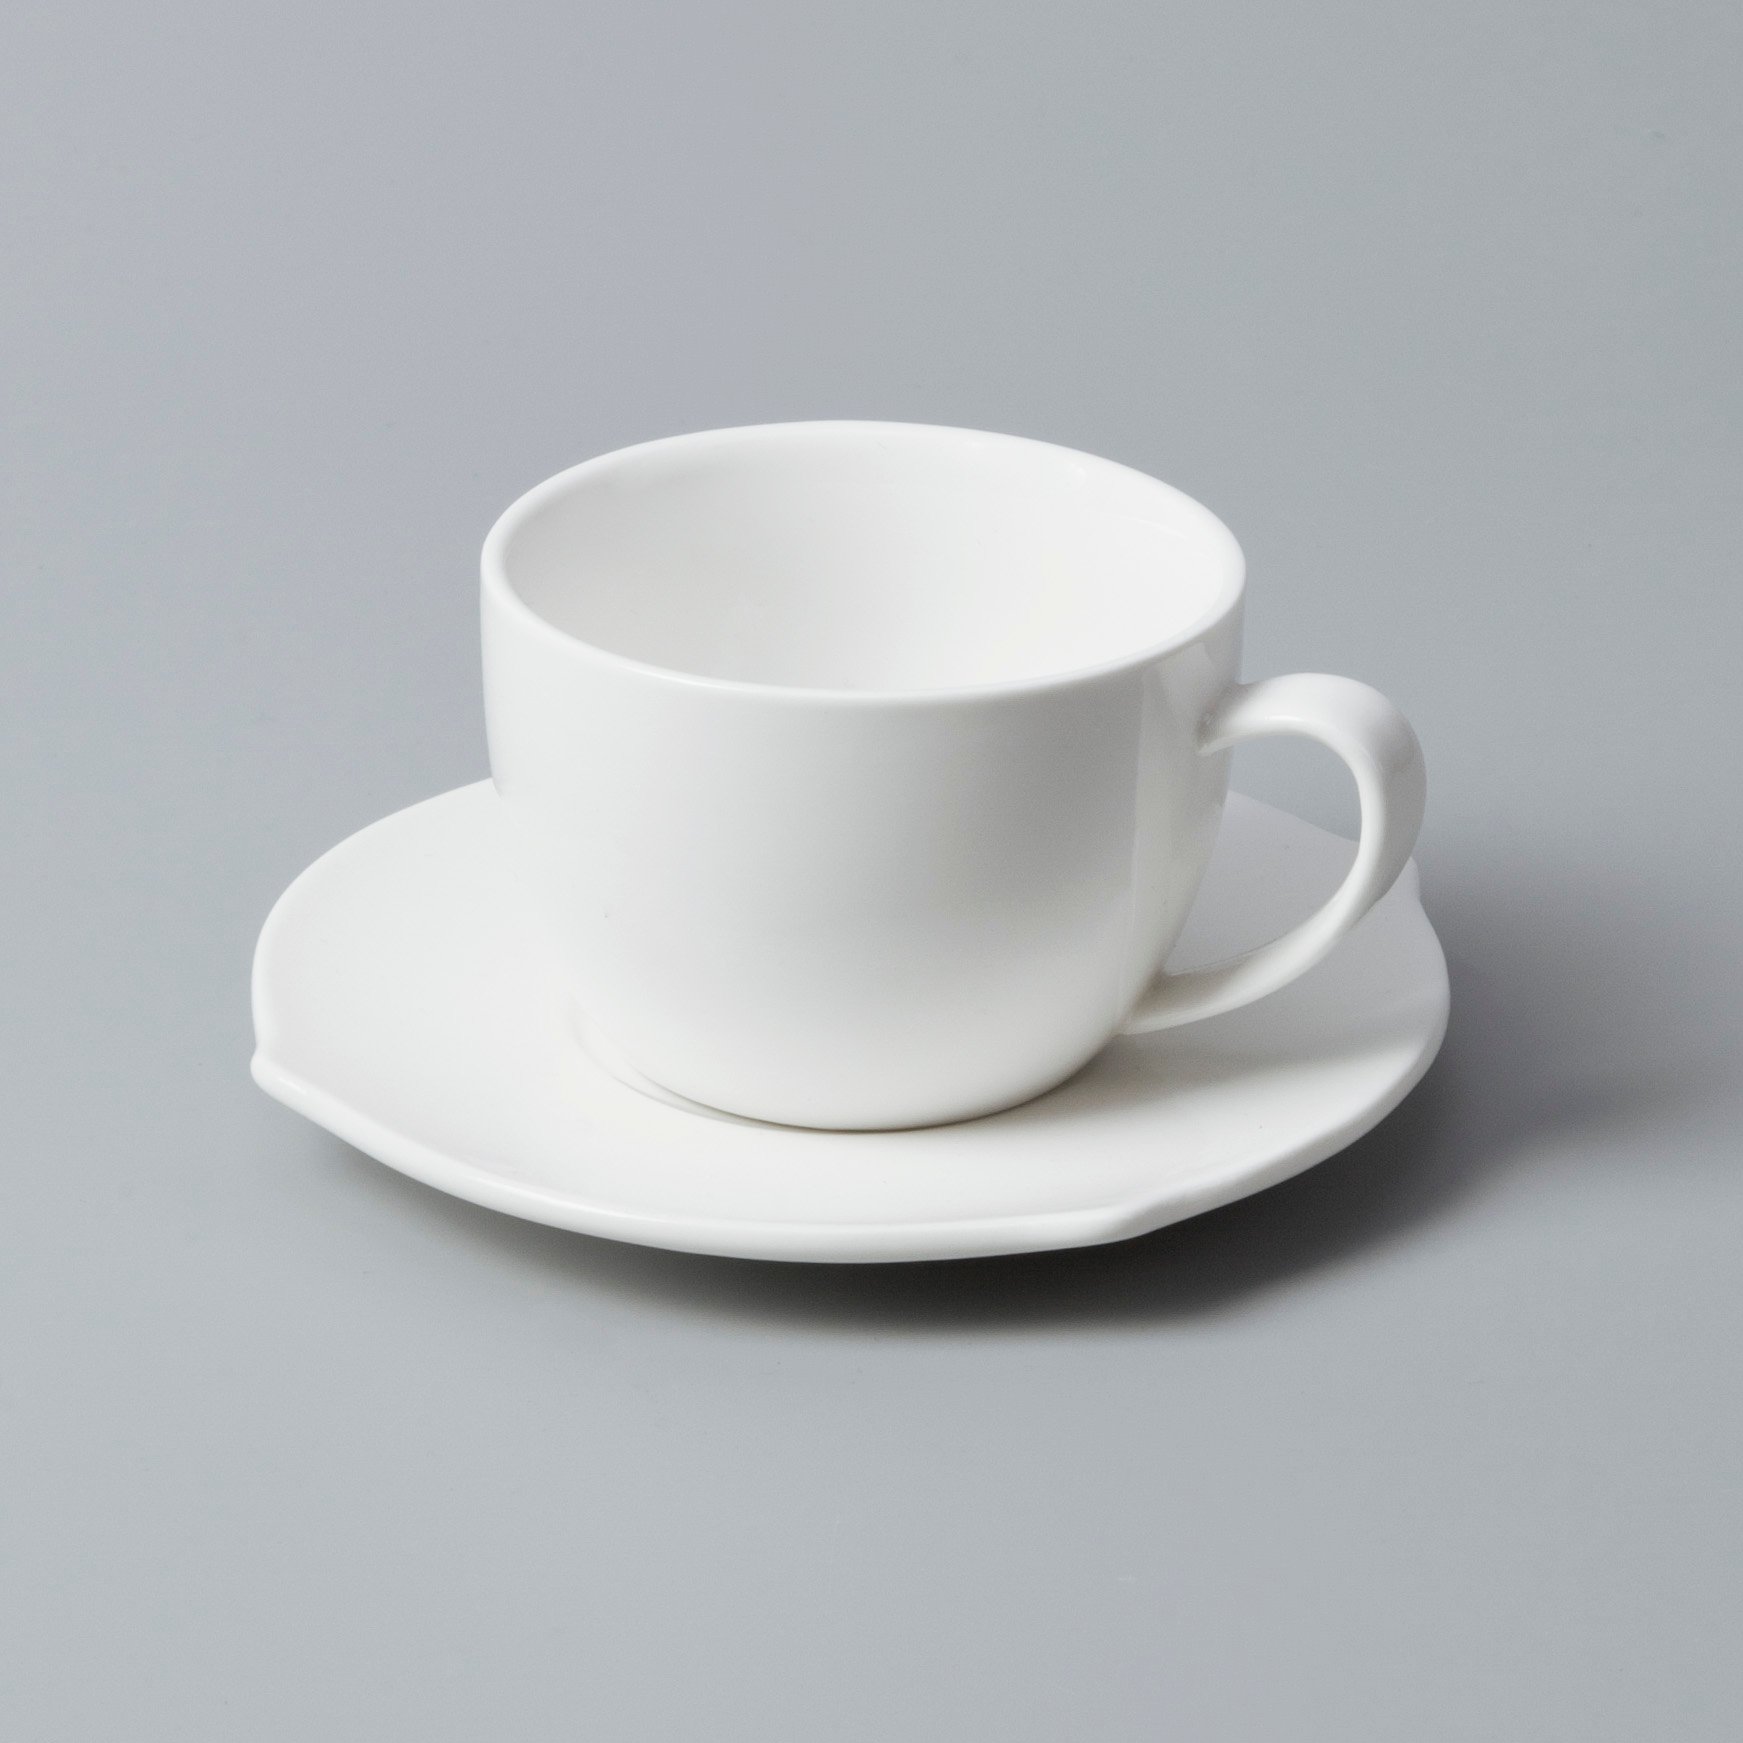 New restaurant chinaware supplier Suppliers for dinner-7